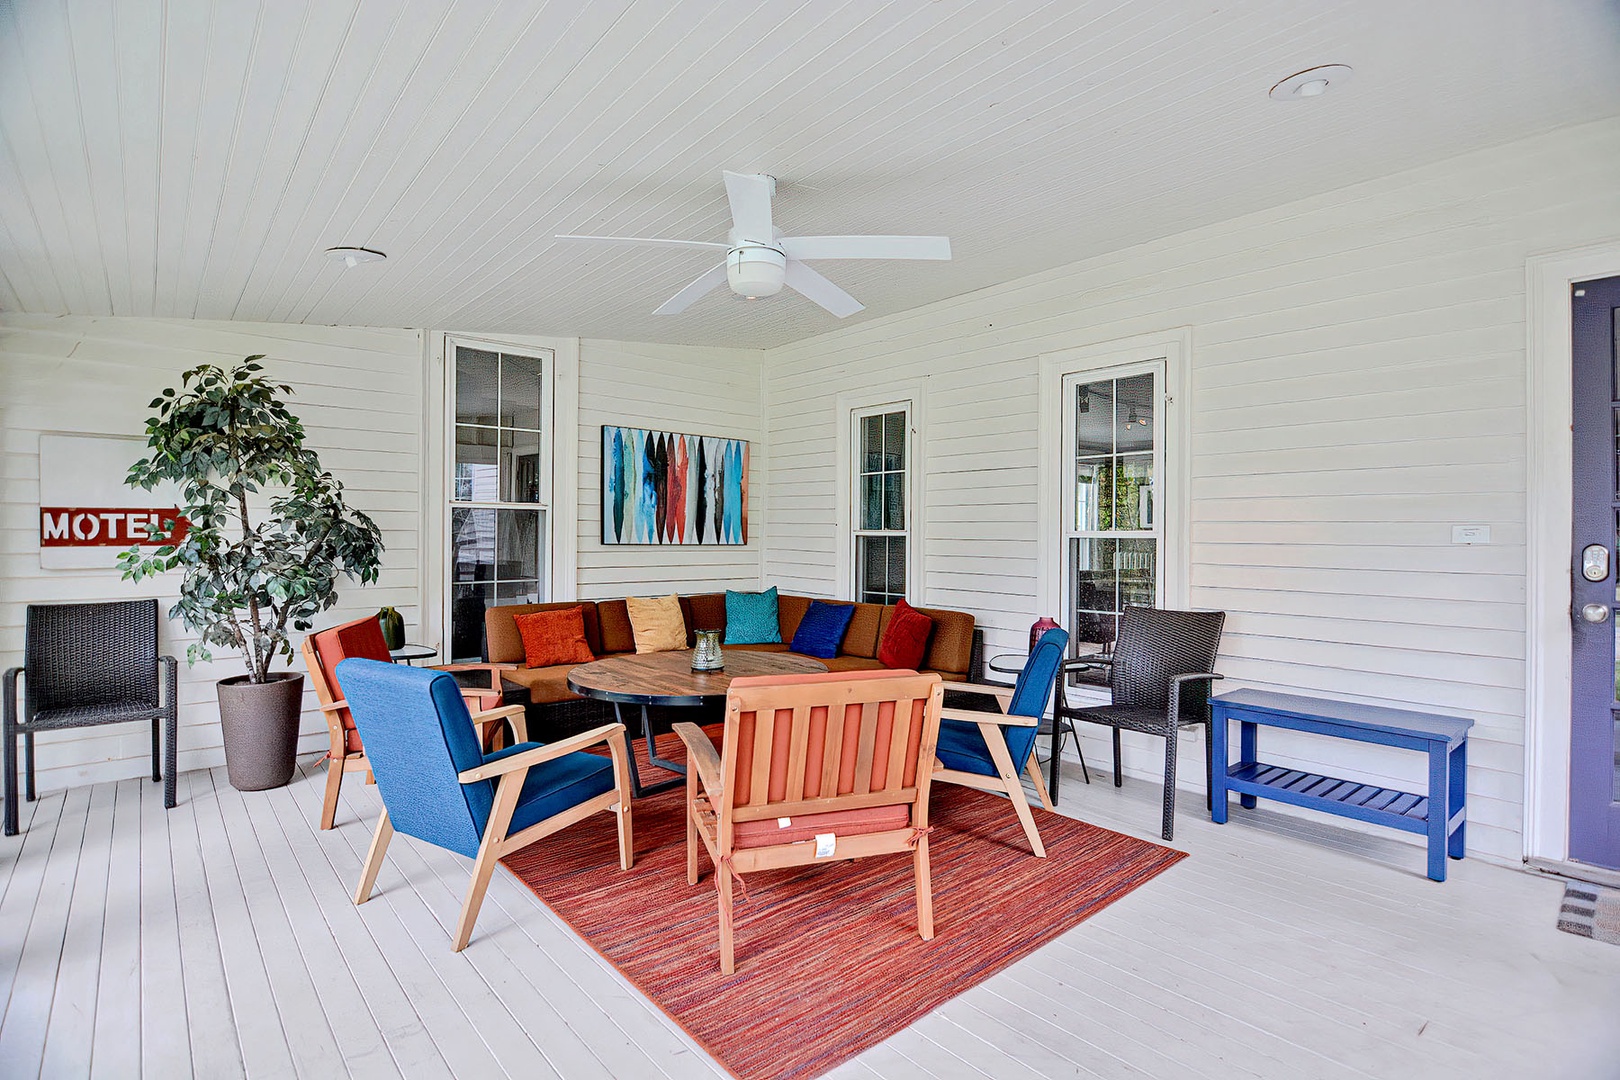 The screened porch is a wonderful place to gather and relax.